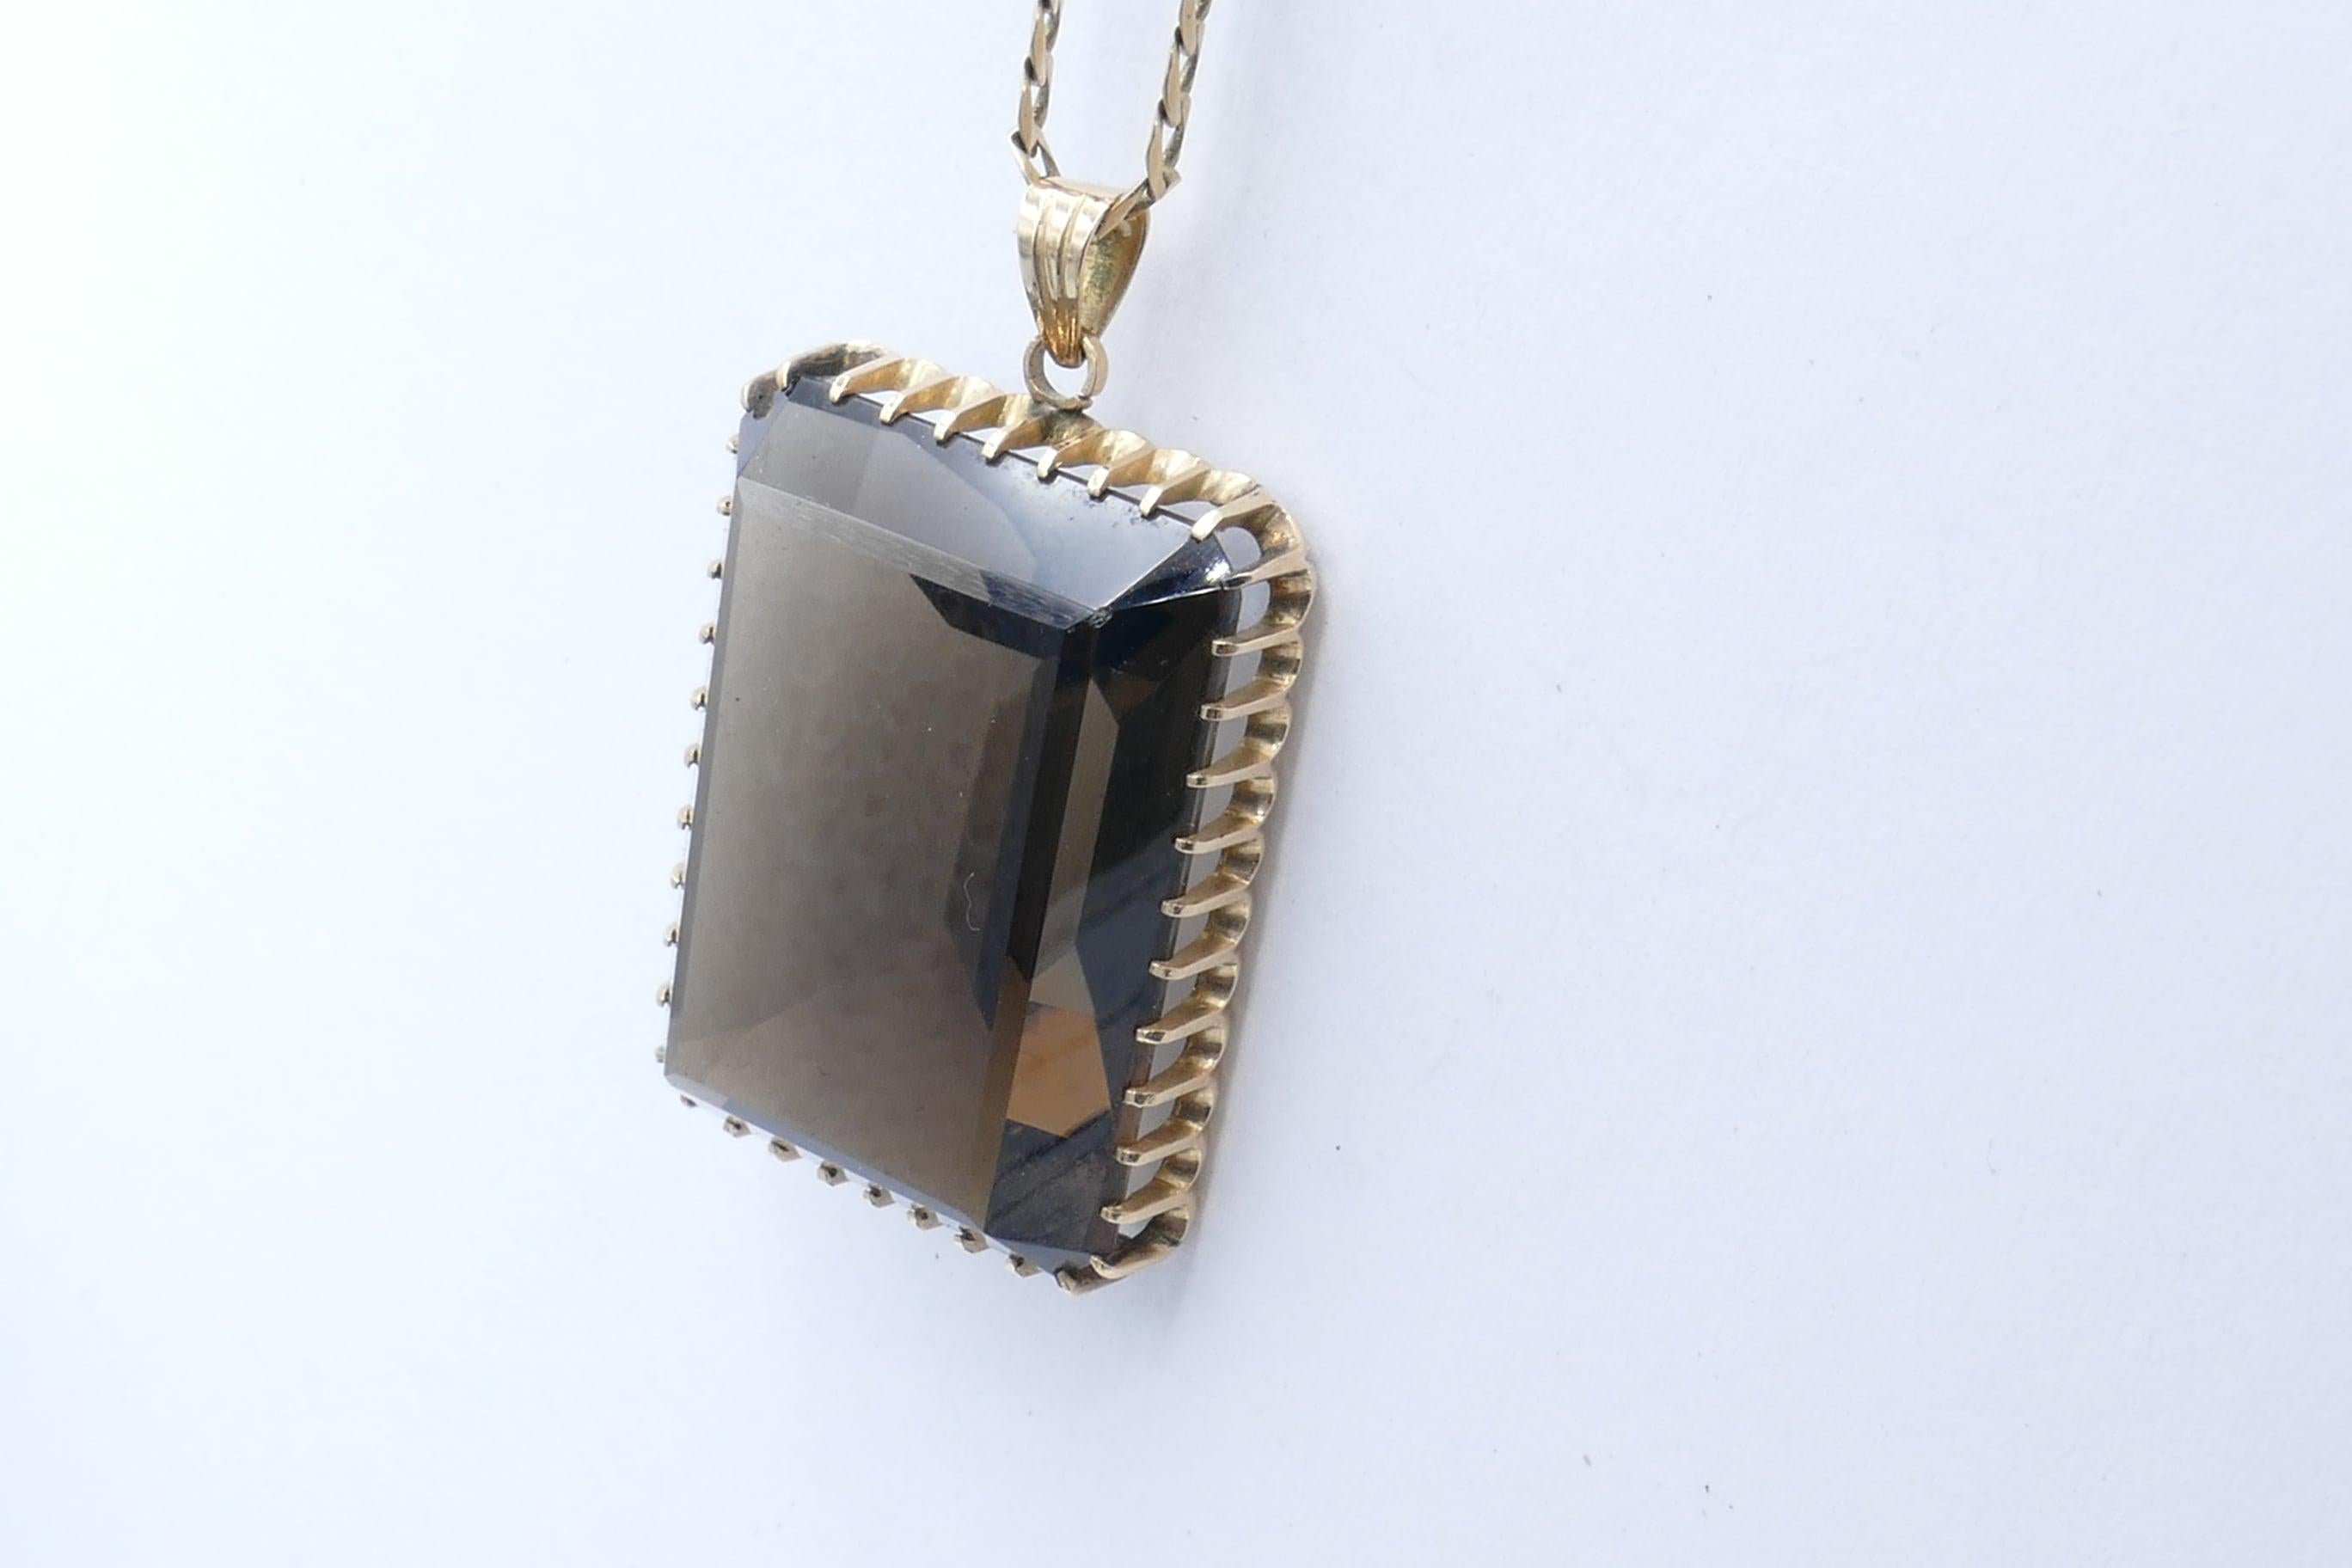 This is one VERY large pendant! 30.48 carats! 
Measuring 31.95mm X 23.08mm X 13.76mm, Colour deep yellowish/brown, very eye-clean, rectangular Emerald cut, multi claw set in a decorative Vintage basket mount.
The pendant measures45mm X 25mm